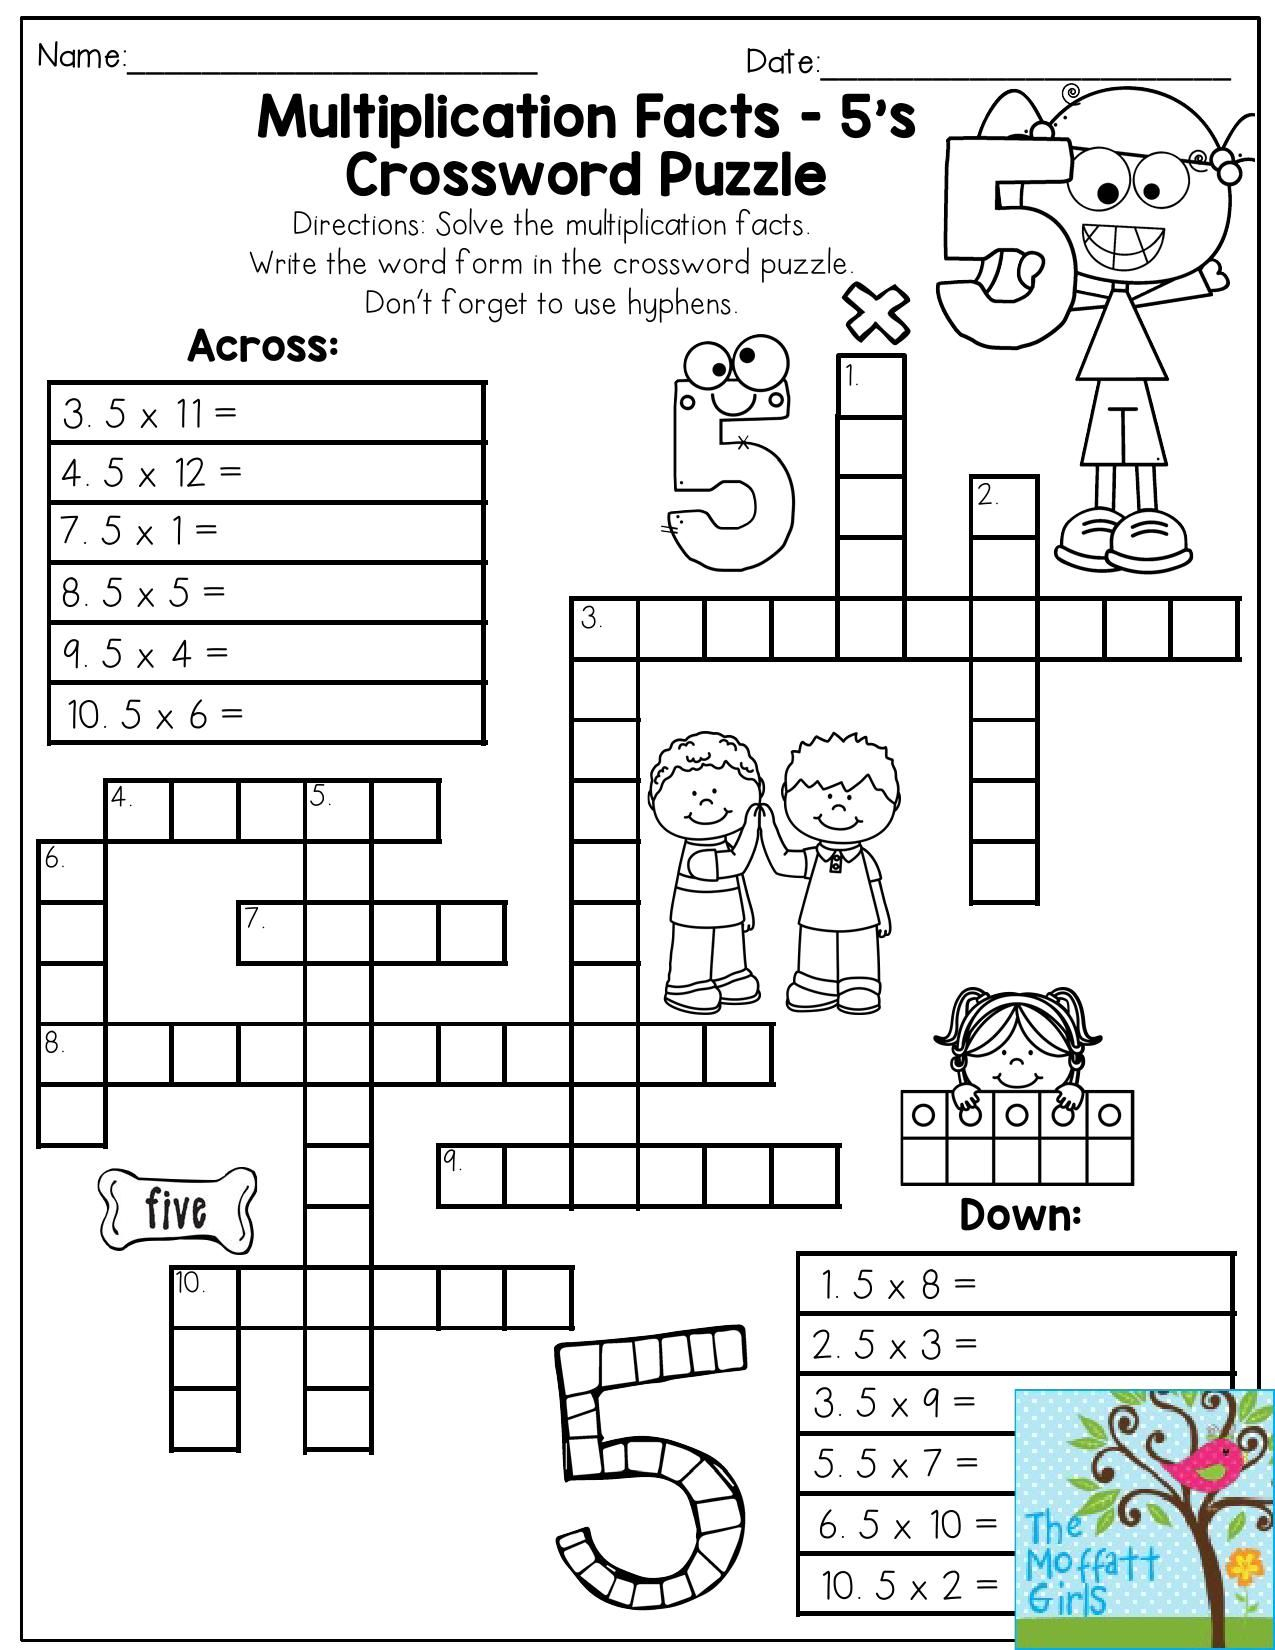 Multiplication Facts Crossword Puzzle- Third Grade Students Love - Printable Crossword Puzzles For Third Graders